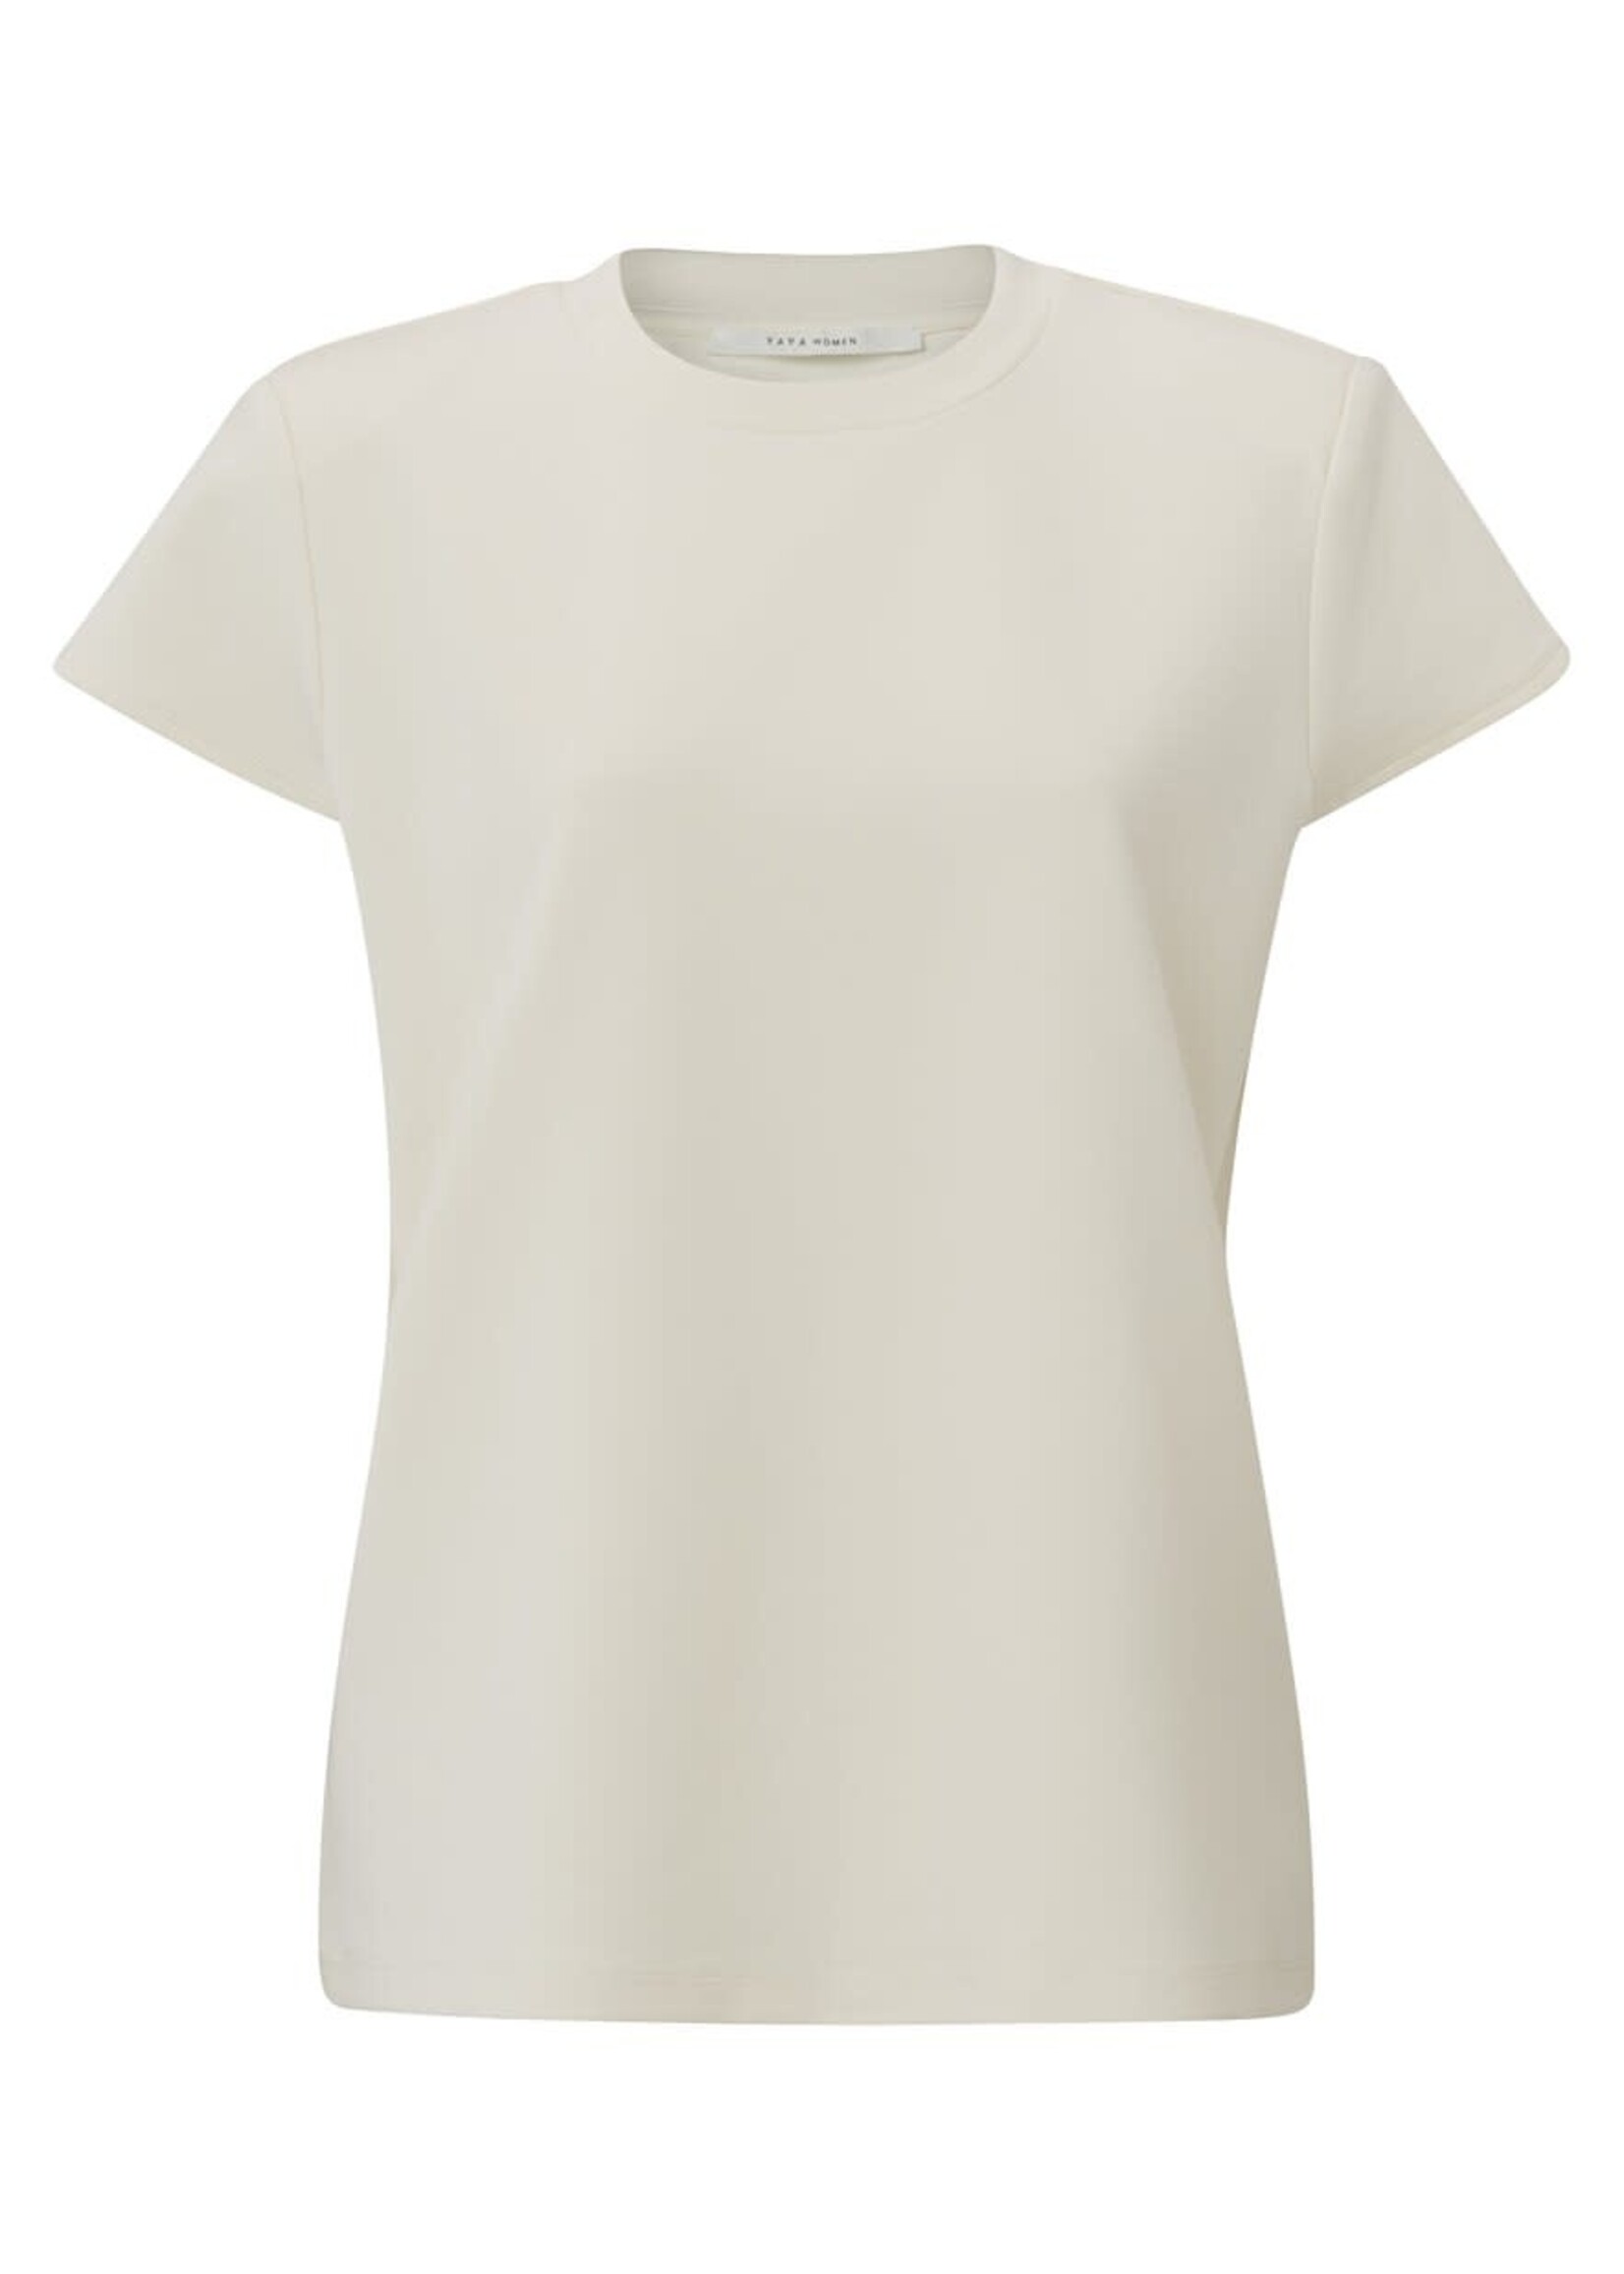 Yaya Yaya, T-shirt with crewneck and cap sleeves in boxy fit, Artic wolf sand, Size: